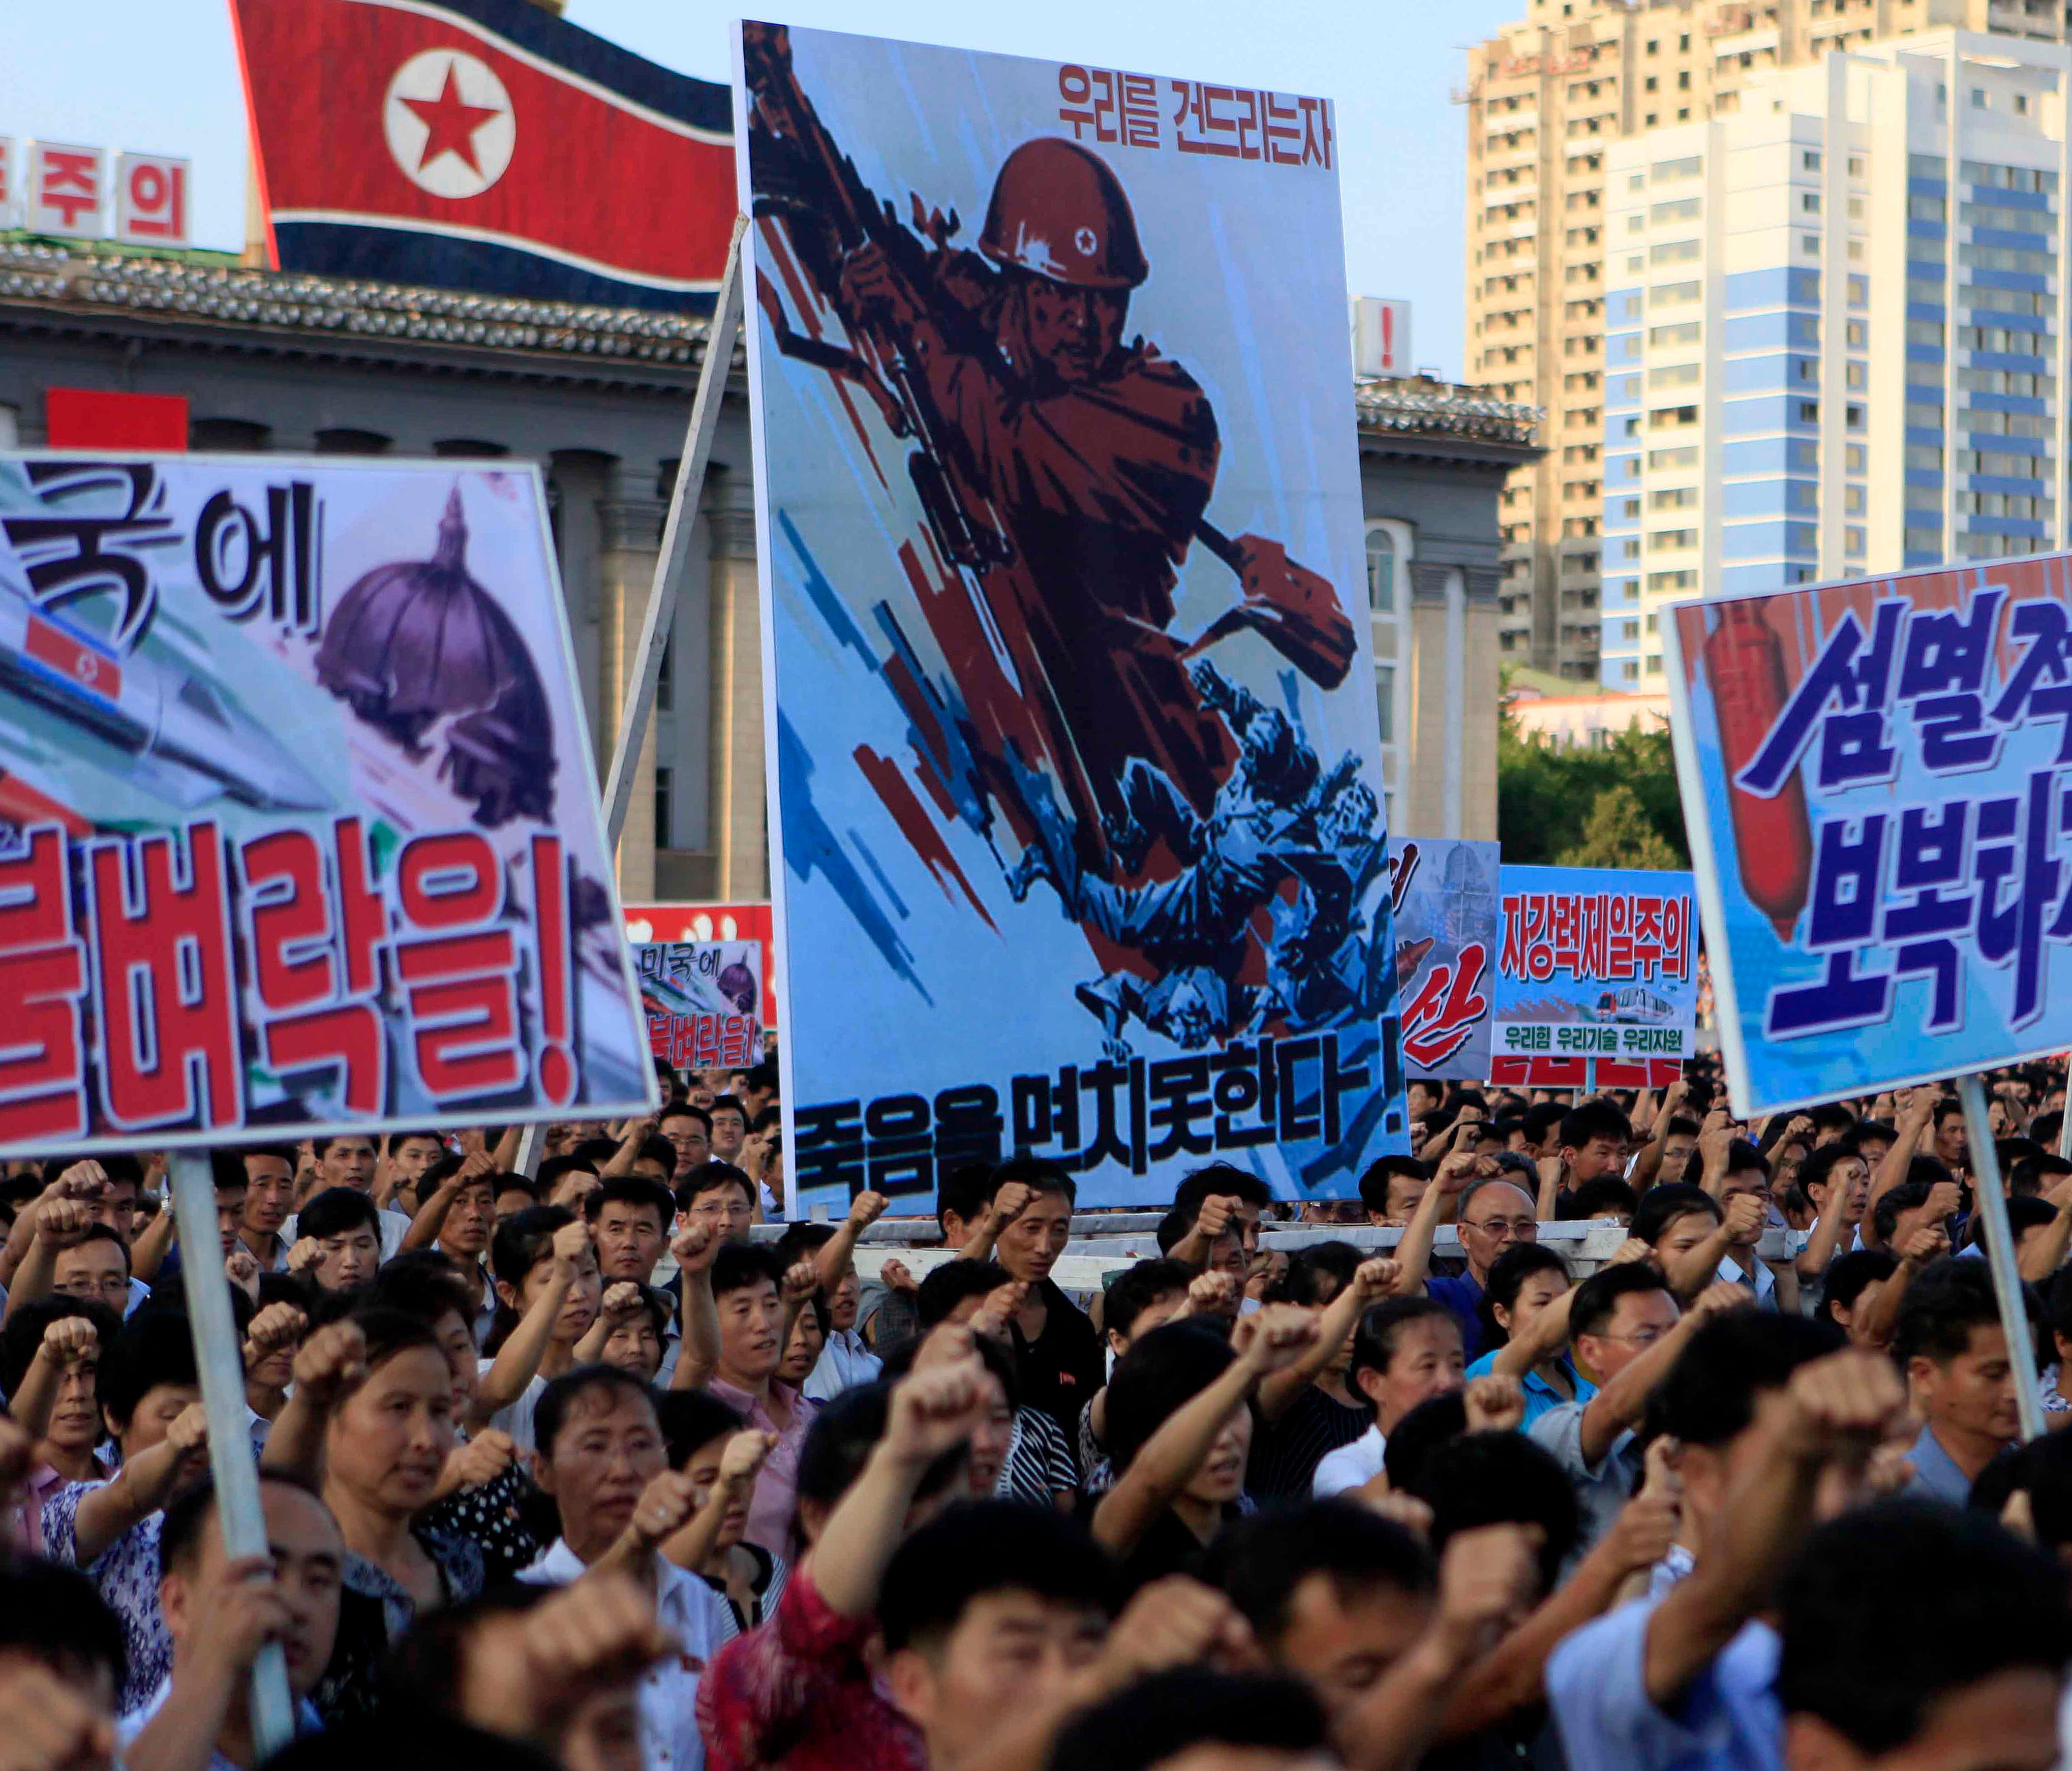 Tens of thousands of North Koreans gathered for a rally at Kim Il Sung Square carrying placards and propaganda slogans as a show of support for their rejection of the United Nations' latest round of sanctions on Wednesday Aug. 9, 2017, in Pyongyang, 